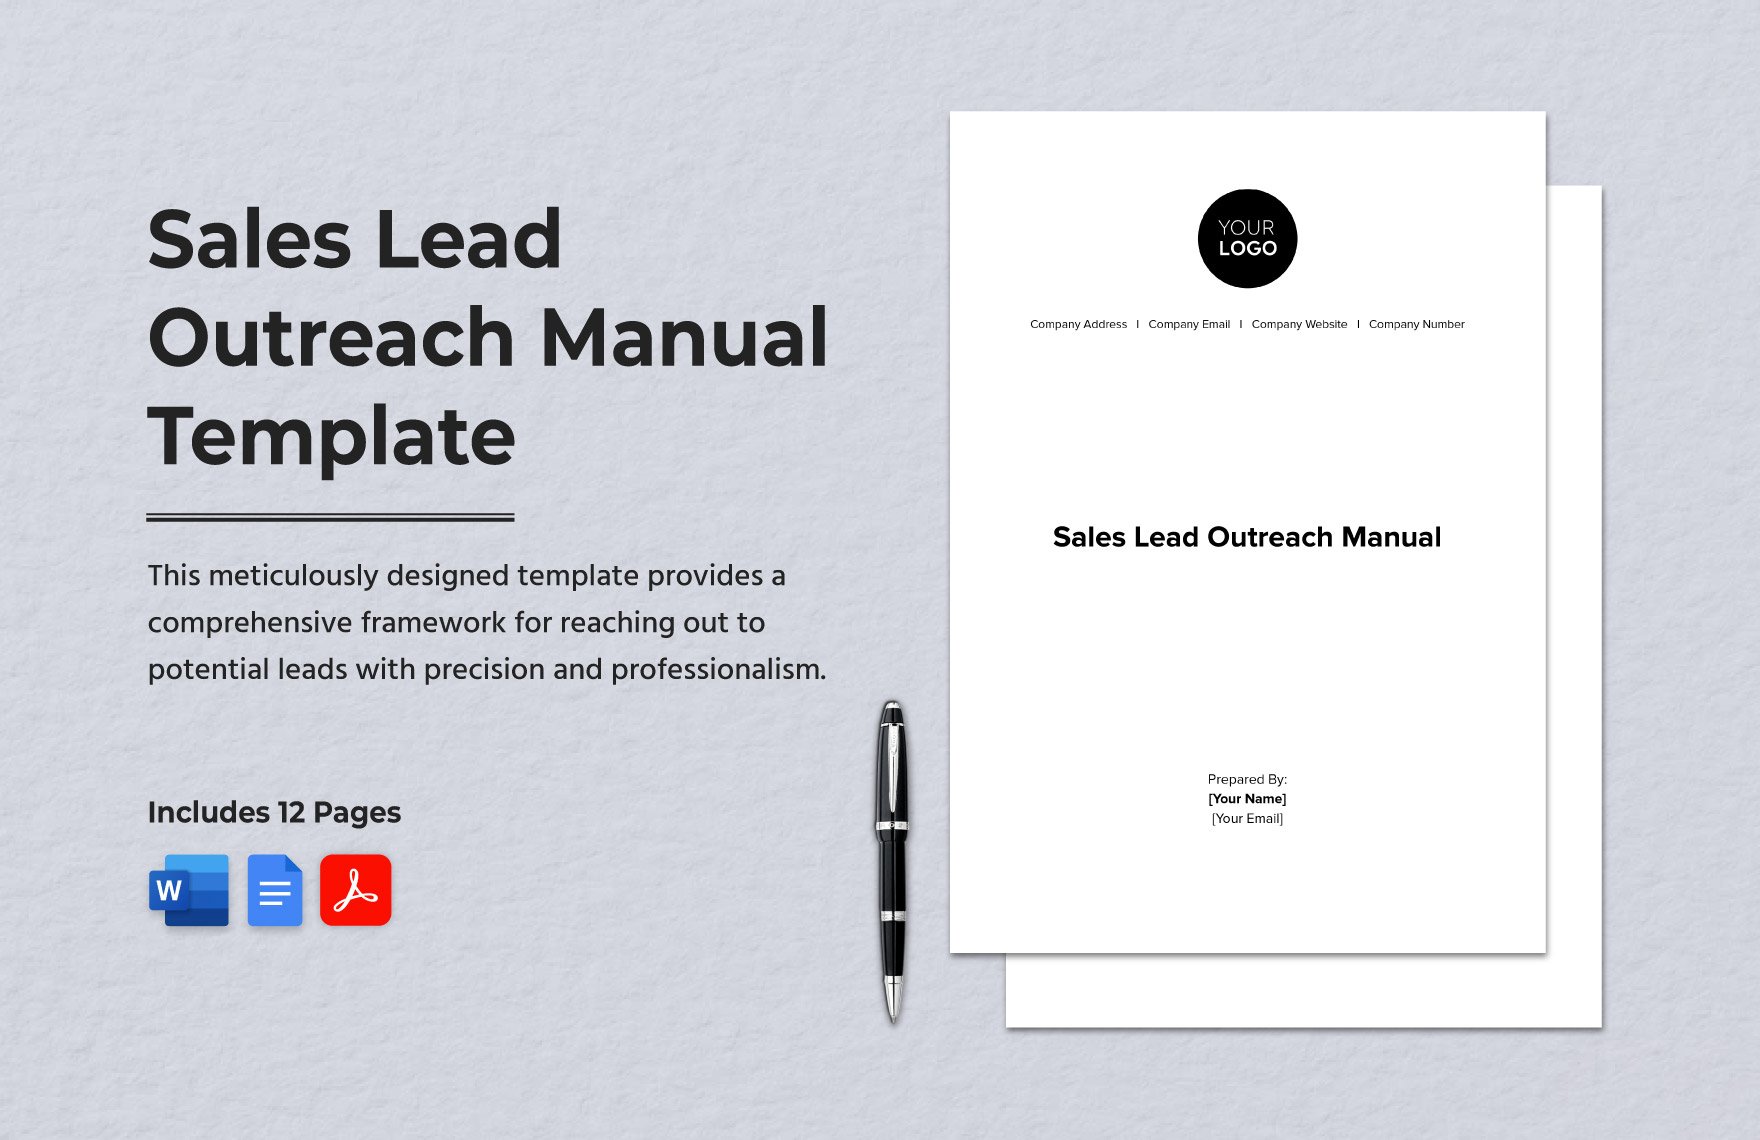 Sales Lead Outreach Manual Template in Word, Google Docs, PDF